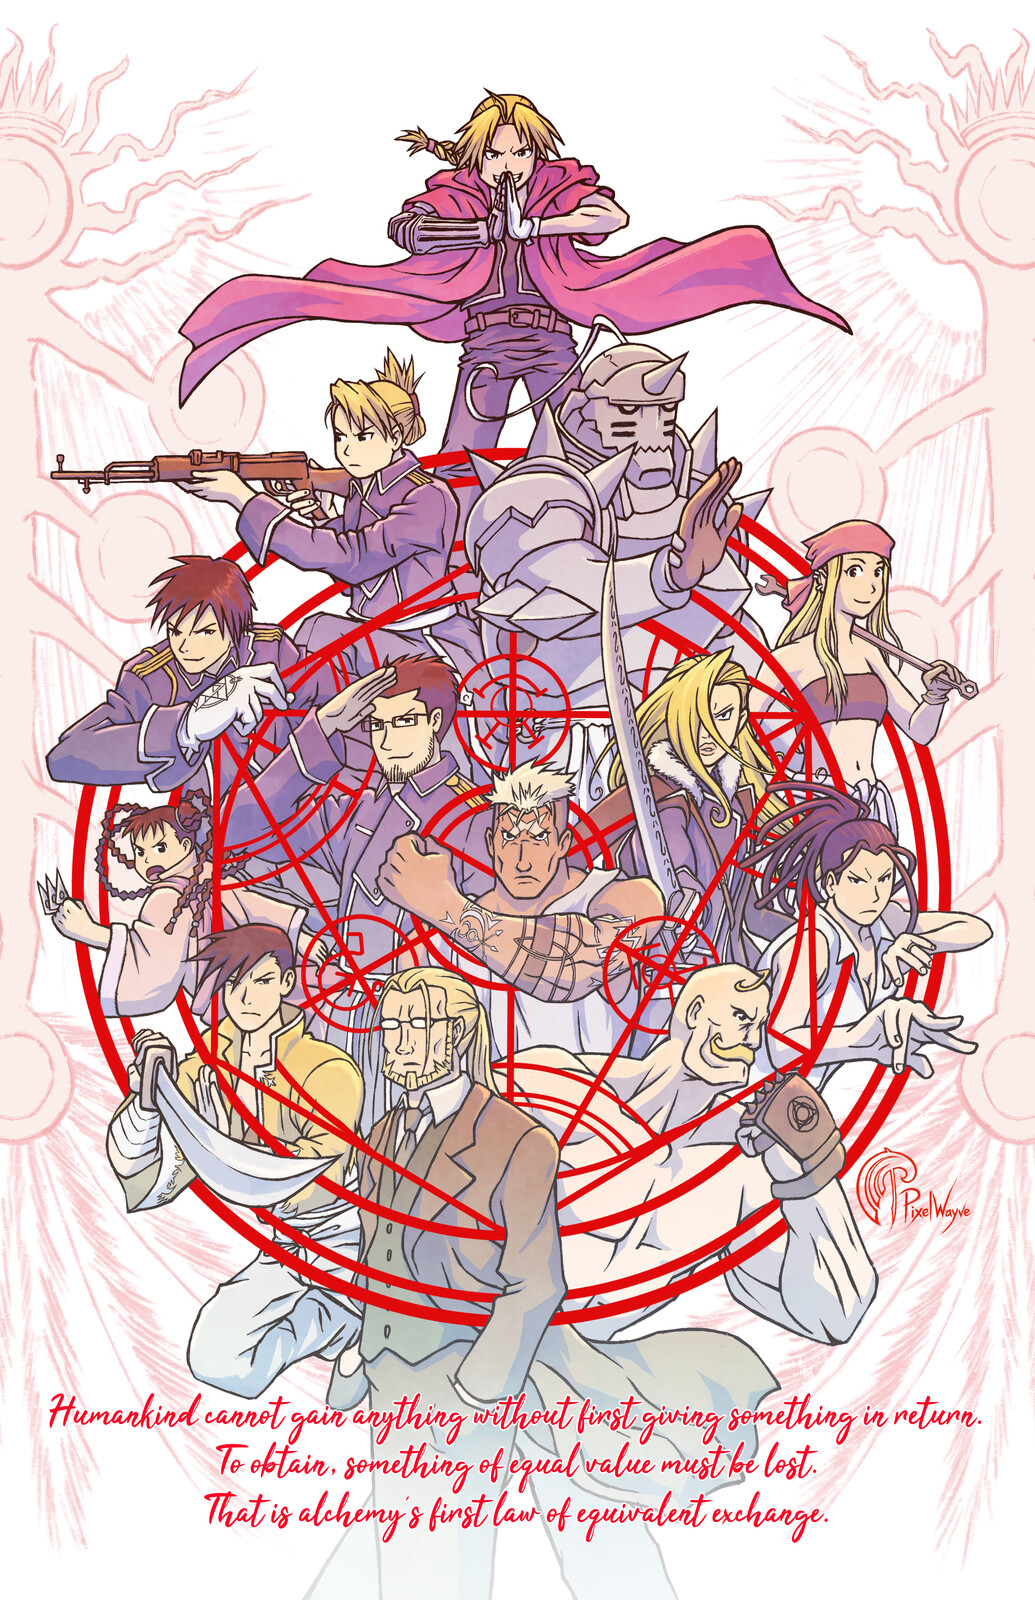 Edward Elric, Riza Hawkeye, Alphonse Elric, Roy Mustang, Maes Hughes, Olivier Armstrong, Winry Rockbell, Mei Chang, Scar, Izumi Curits, Ling Yao, Van Hohenheim, and Alex Armstrong from Fullmetal Alchemist